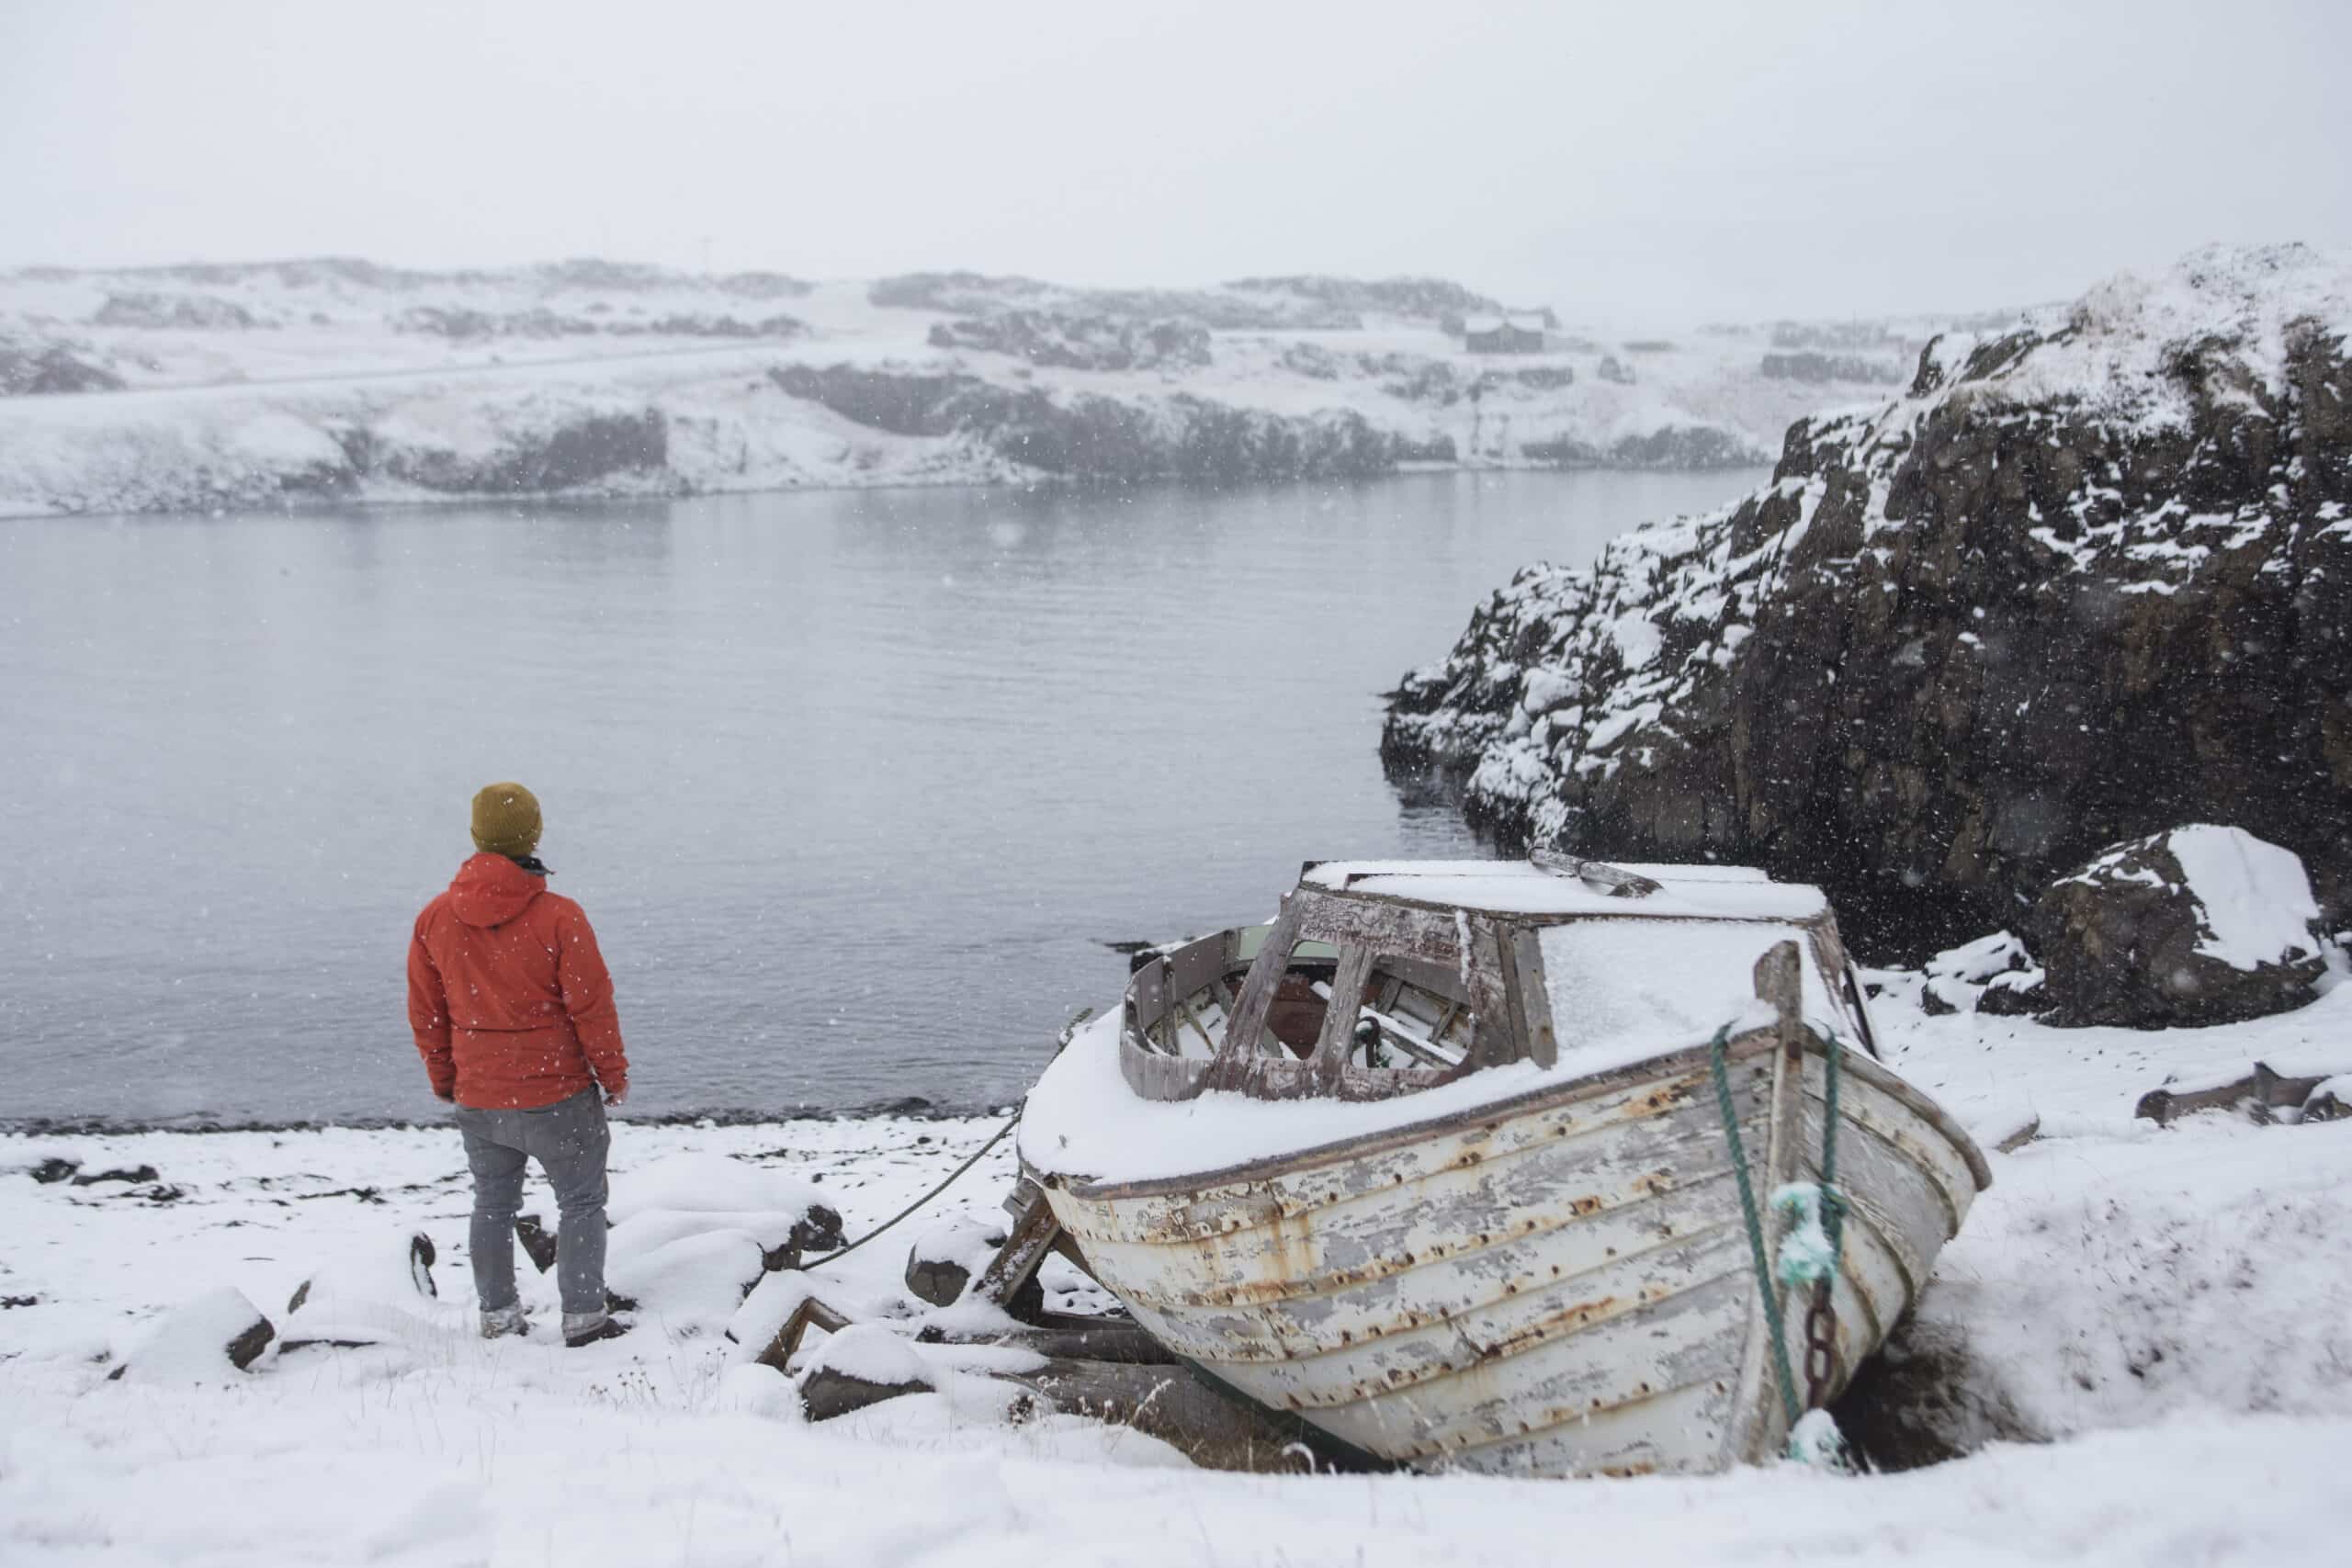 A man next to a boat by a lake in Iceland, snow everywhere, winter scene.